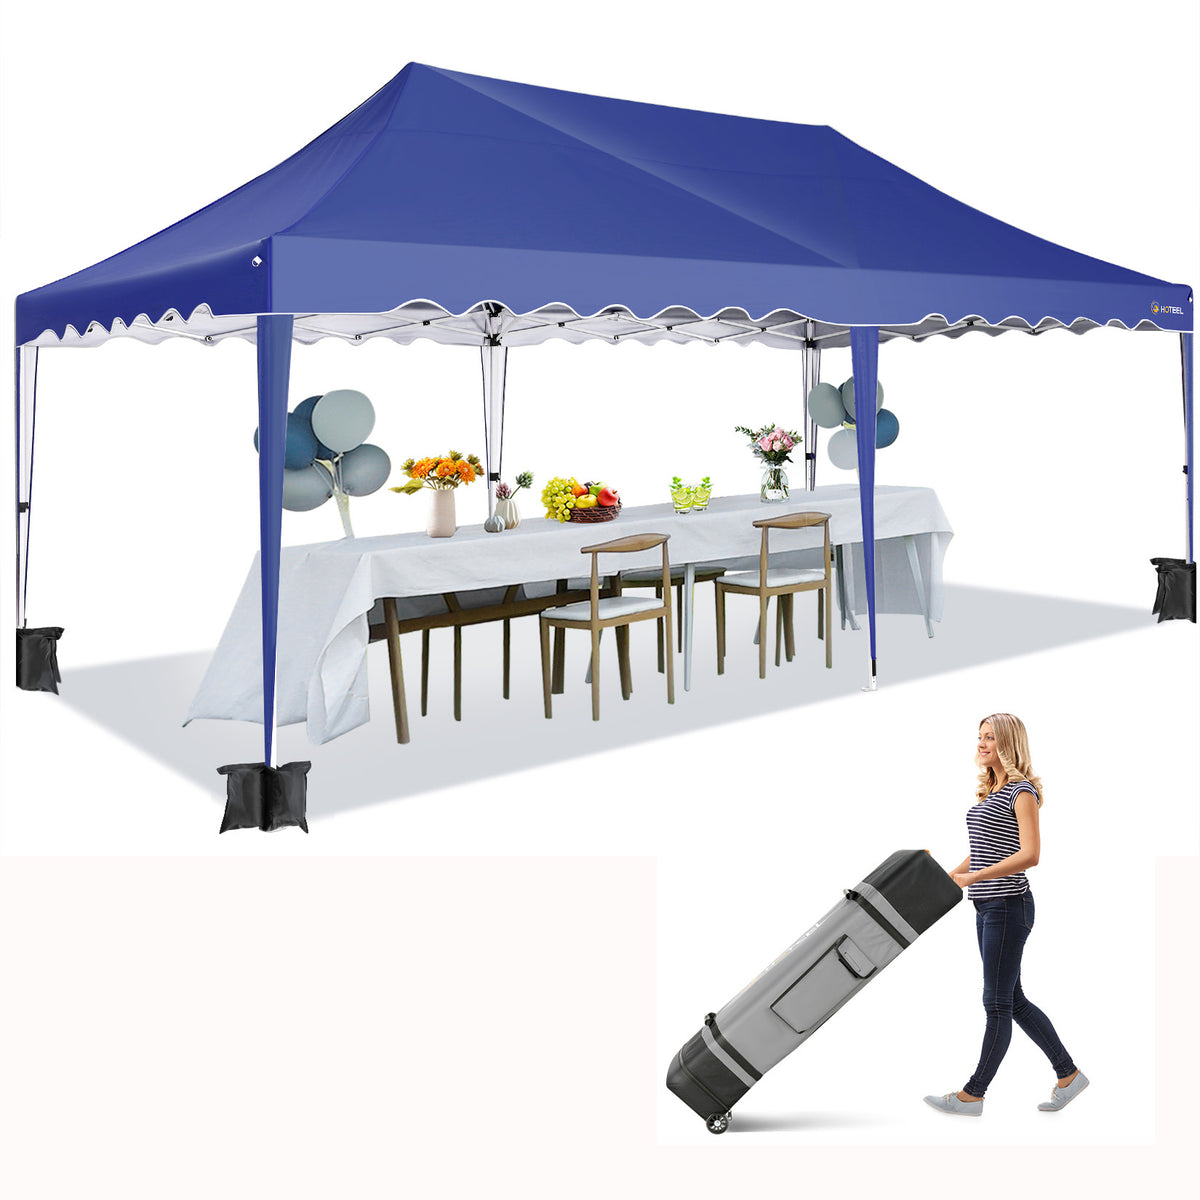 HOTEEL 10'x20' Pop Up Canopy Tent,Outdoor Canopy with Wheeled Bag,for Parties,Wedding,Backyard,Camping